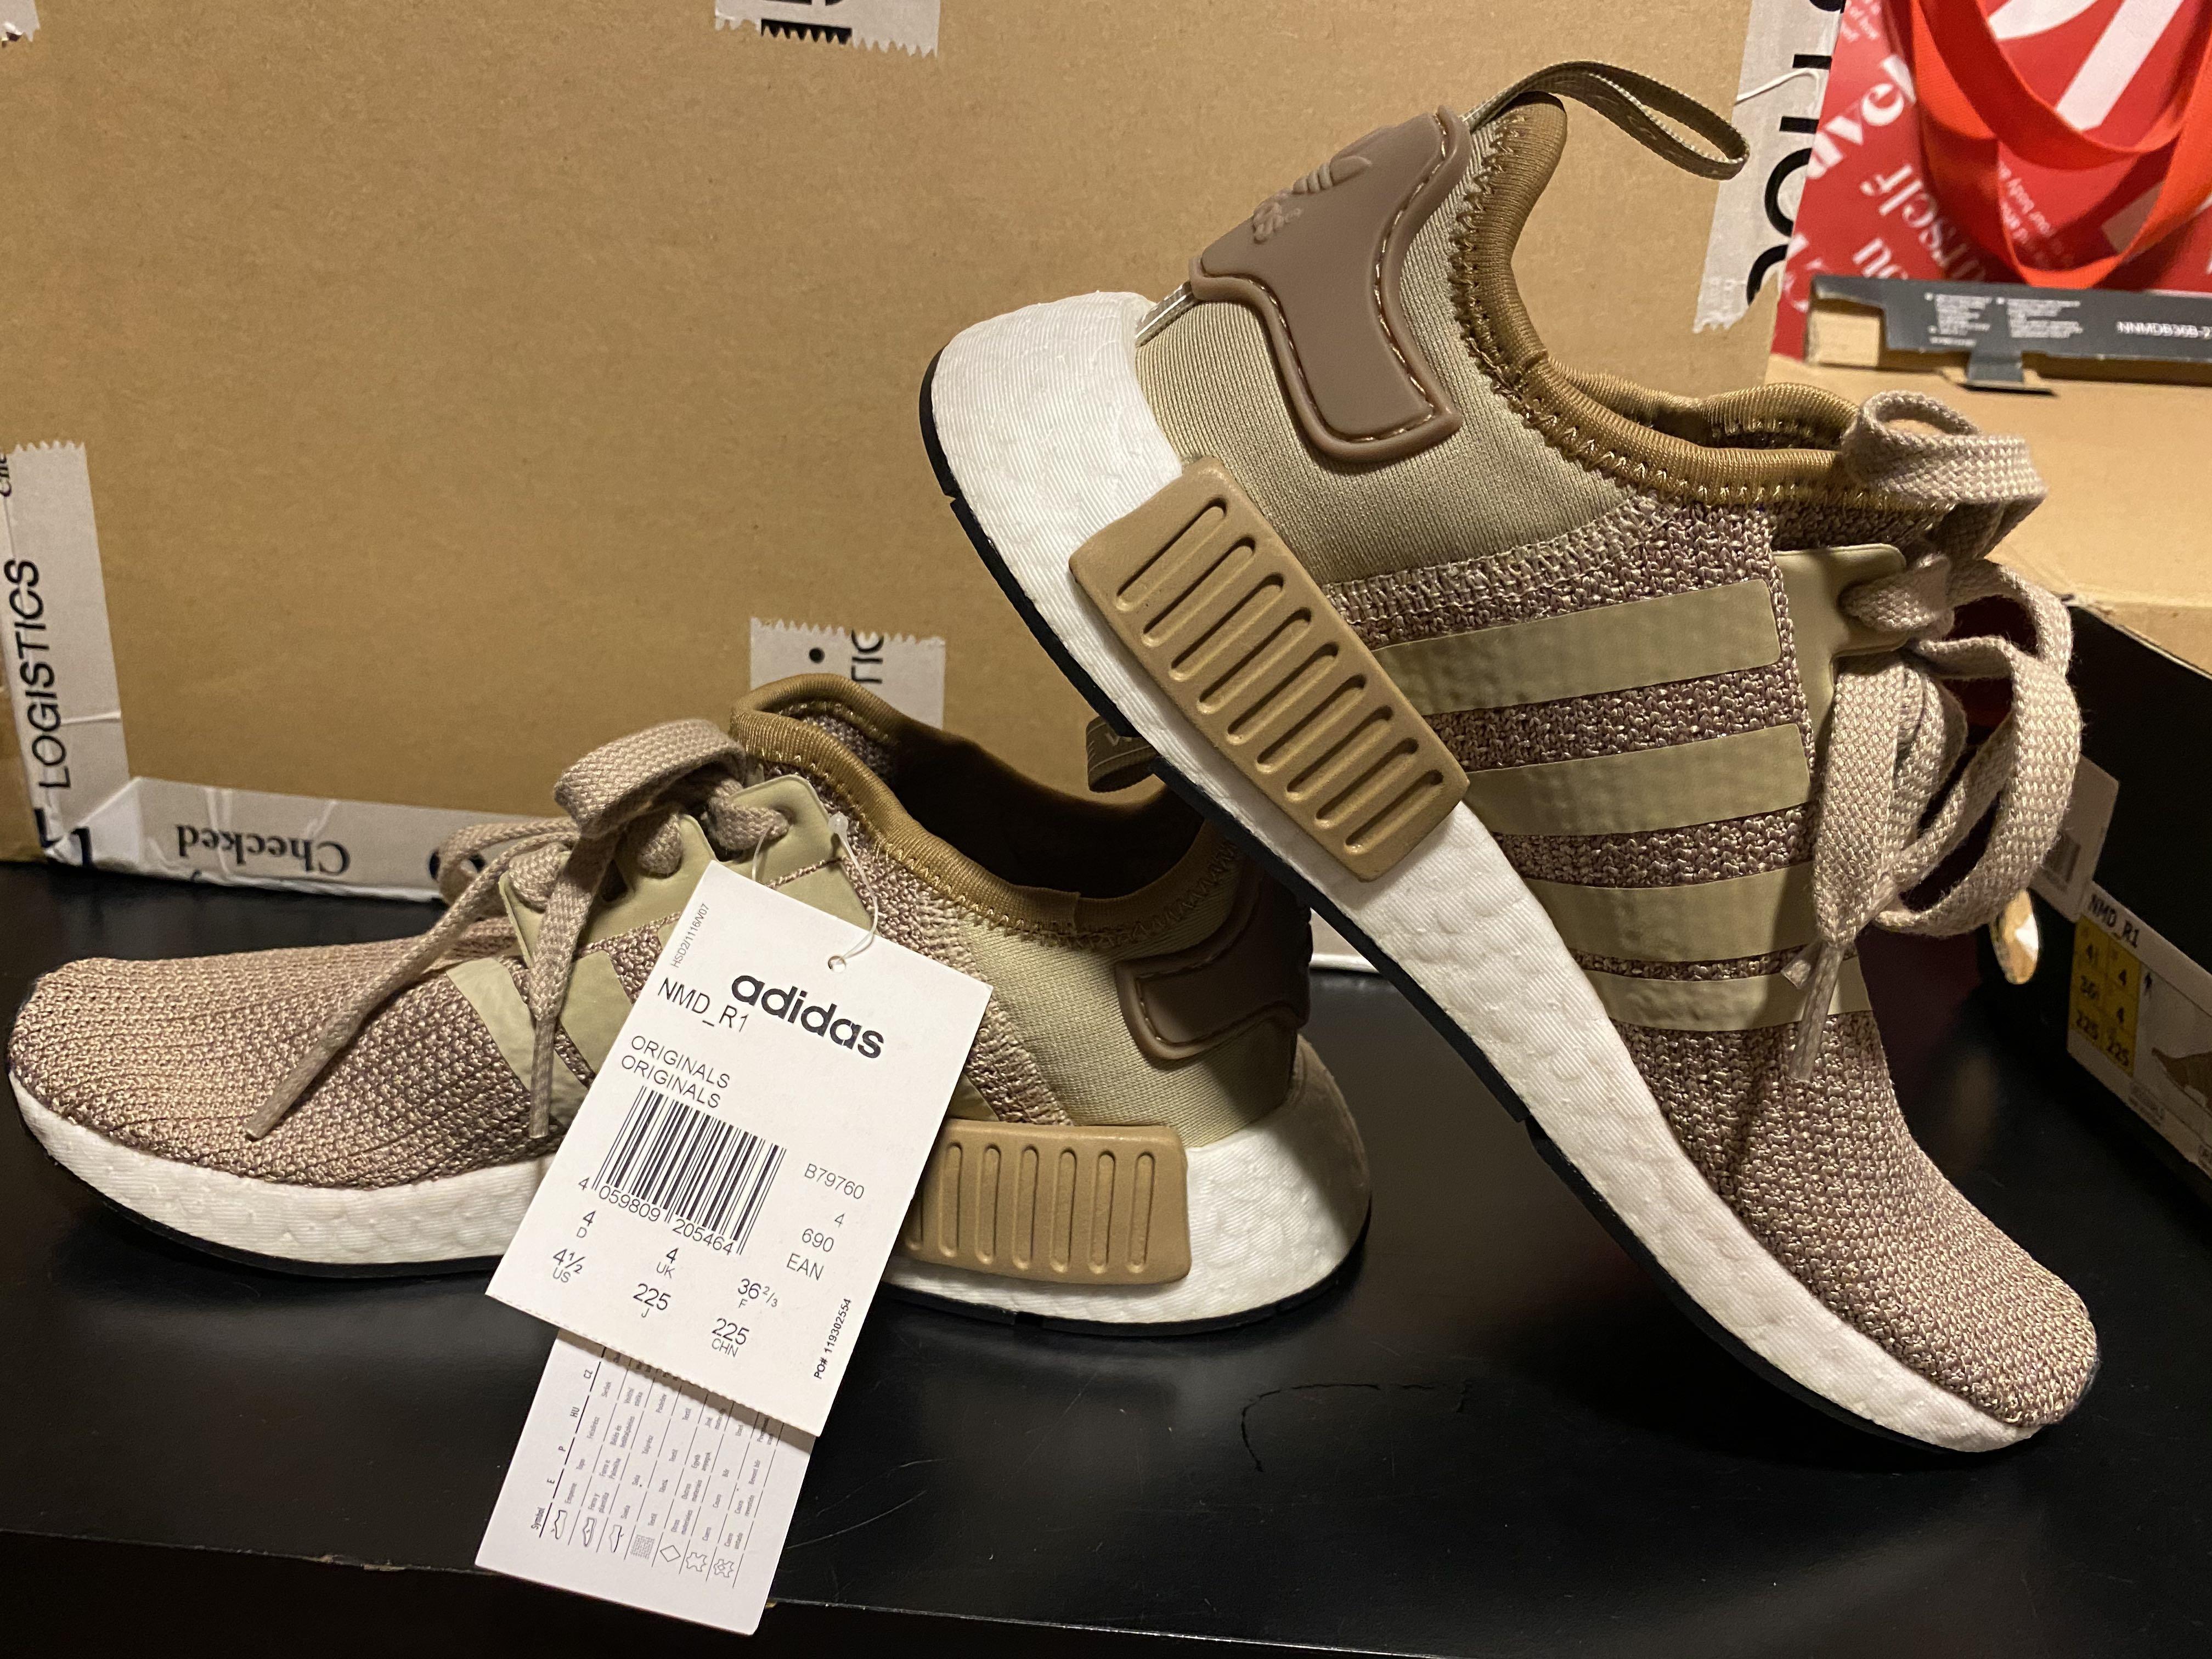 WTS brand new adidas NMD R1 beige (UK 